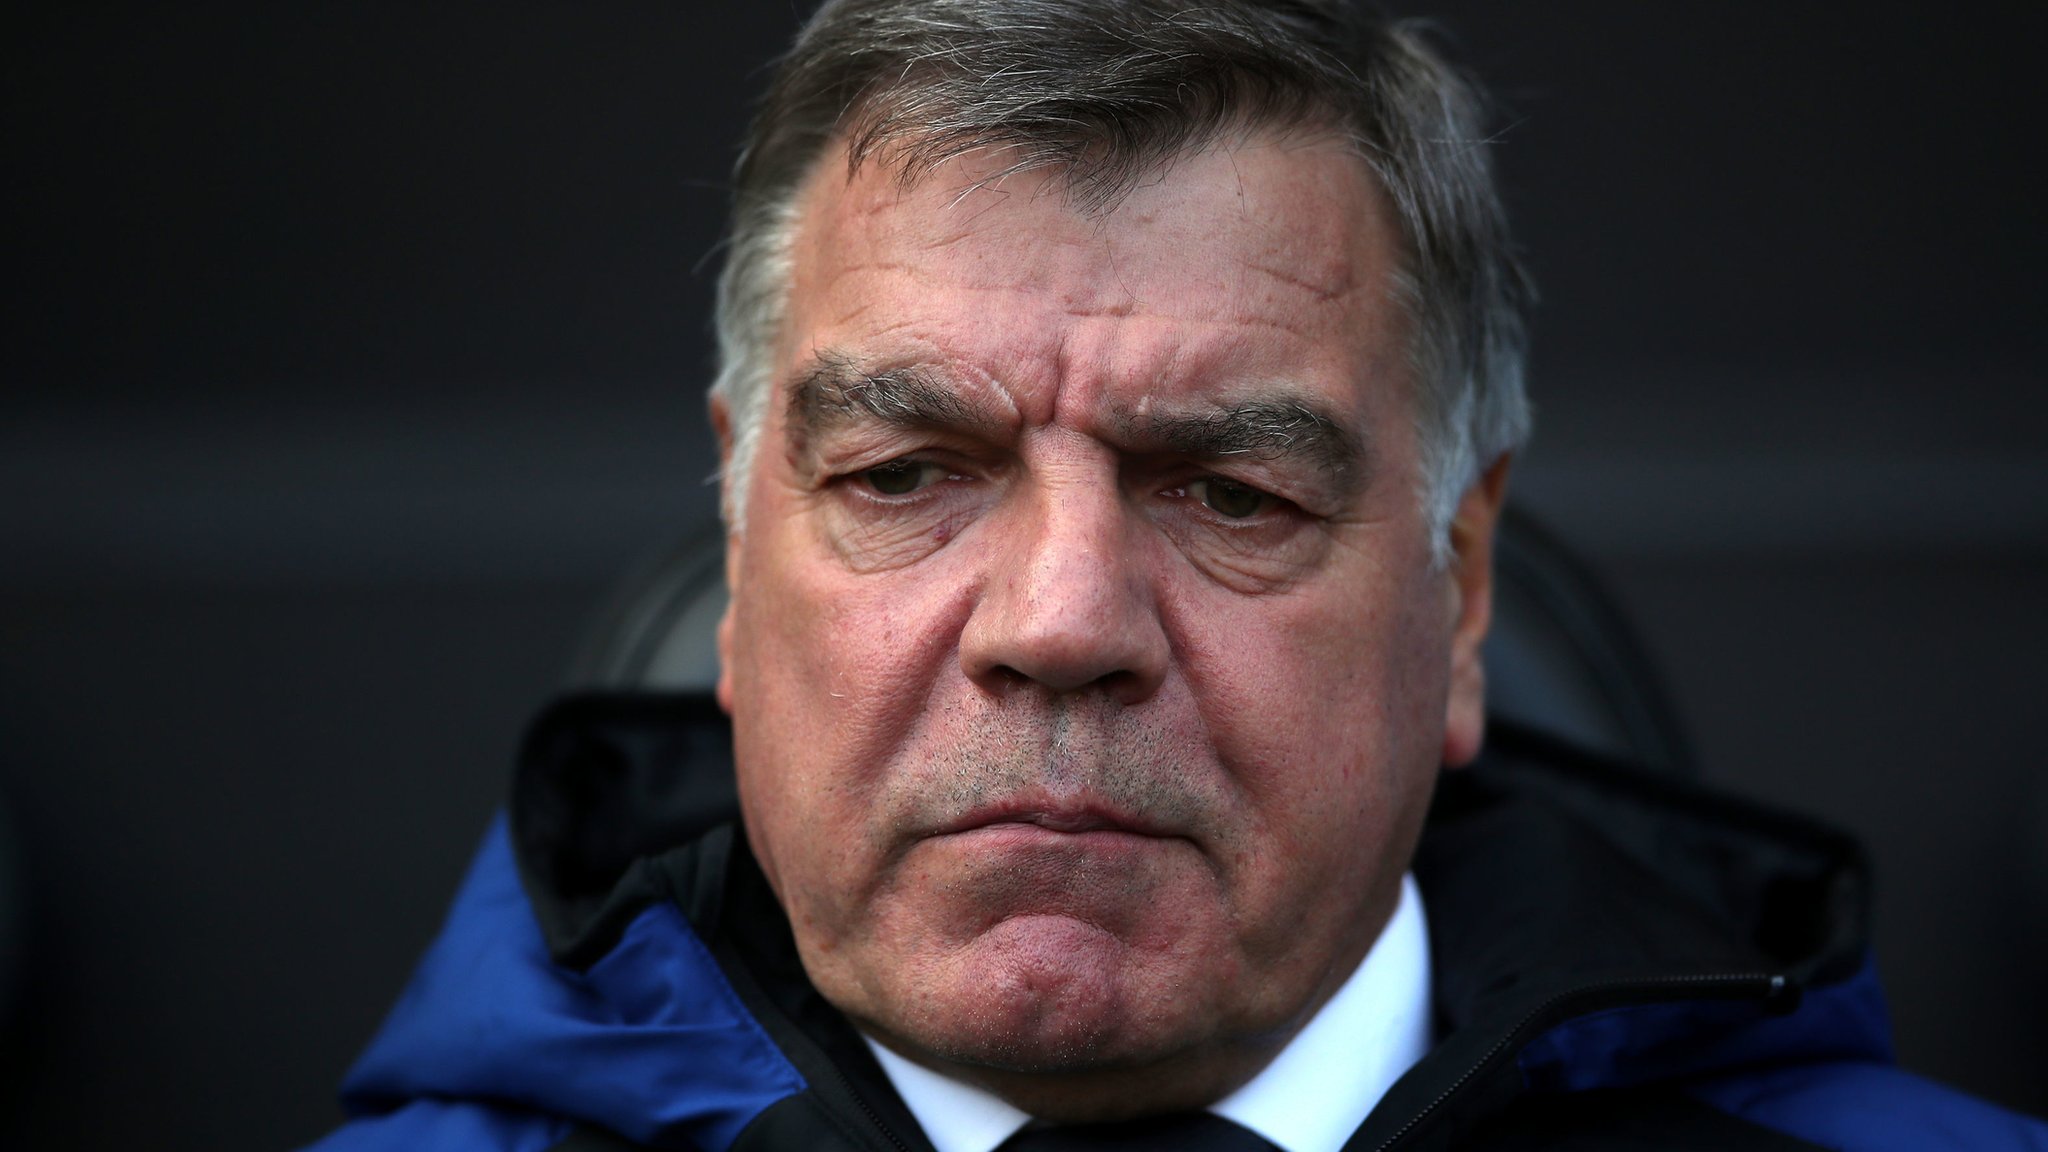 Sam Allardyce: Former Everton boss says he knew he would be sacked